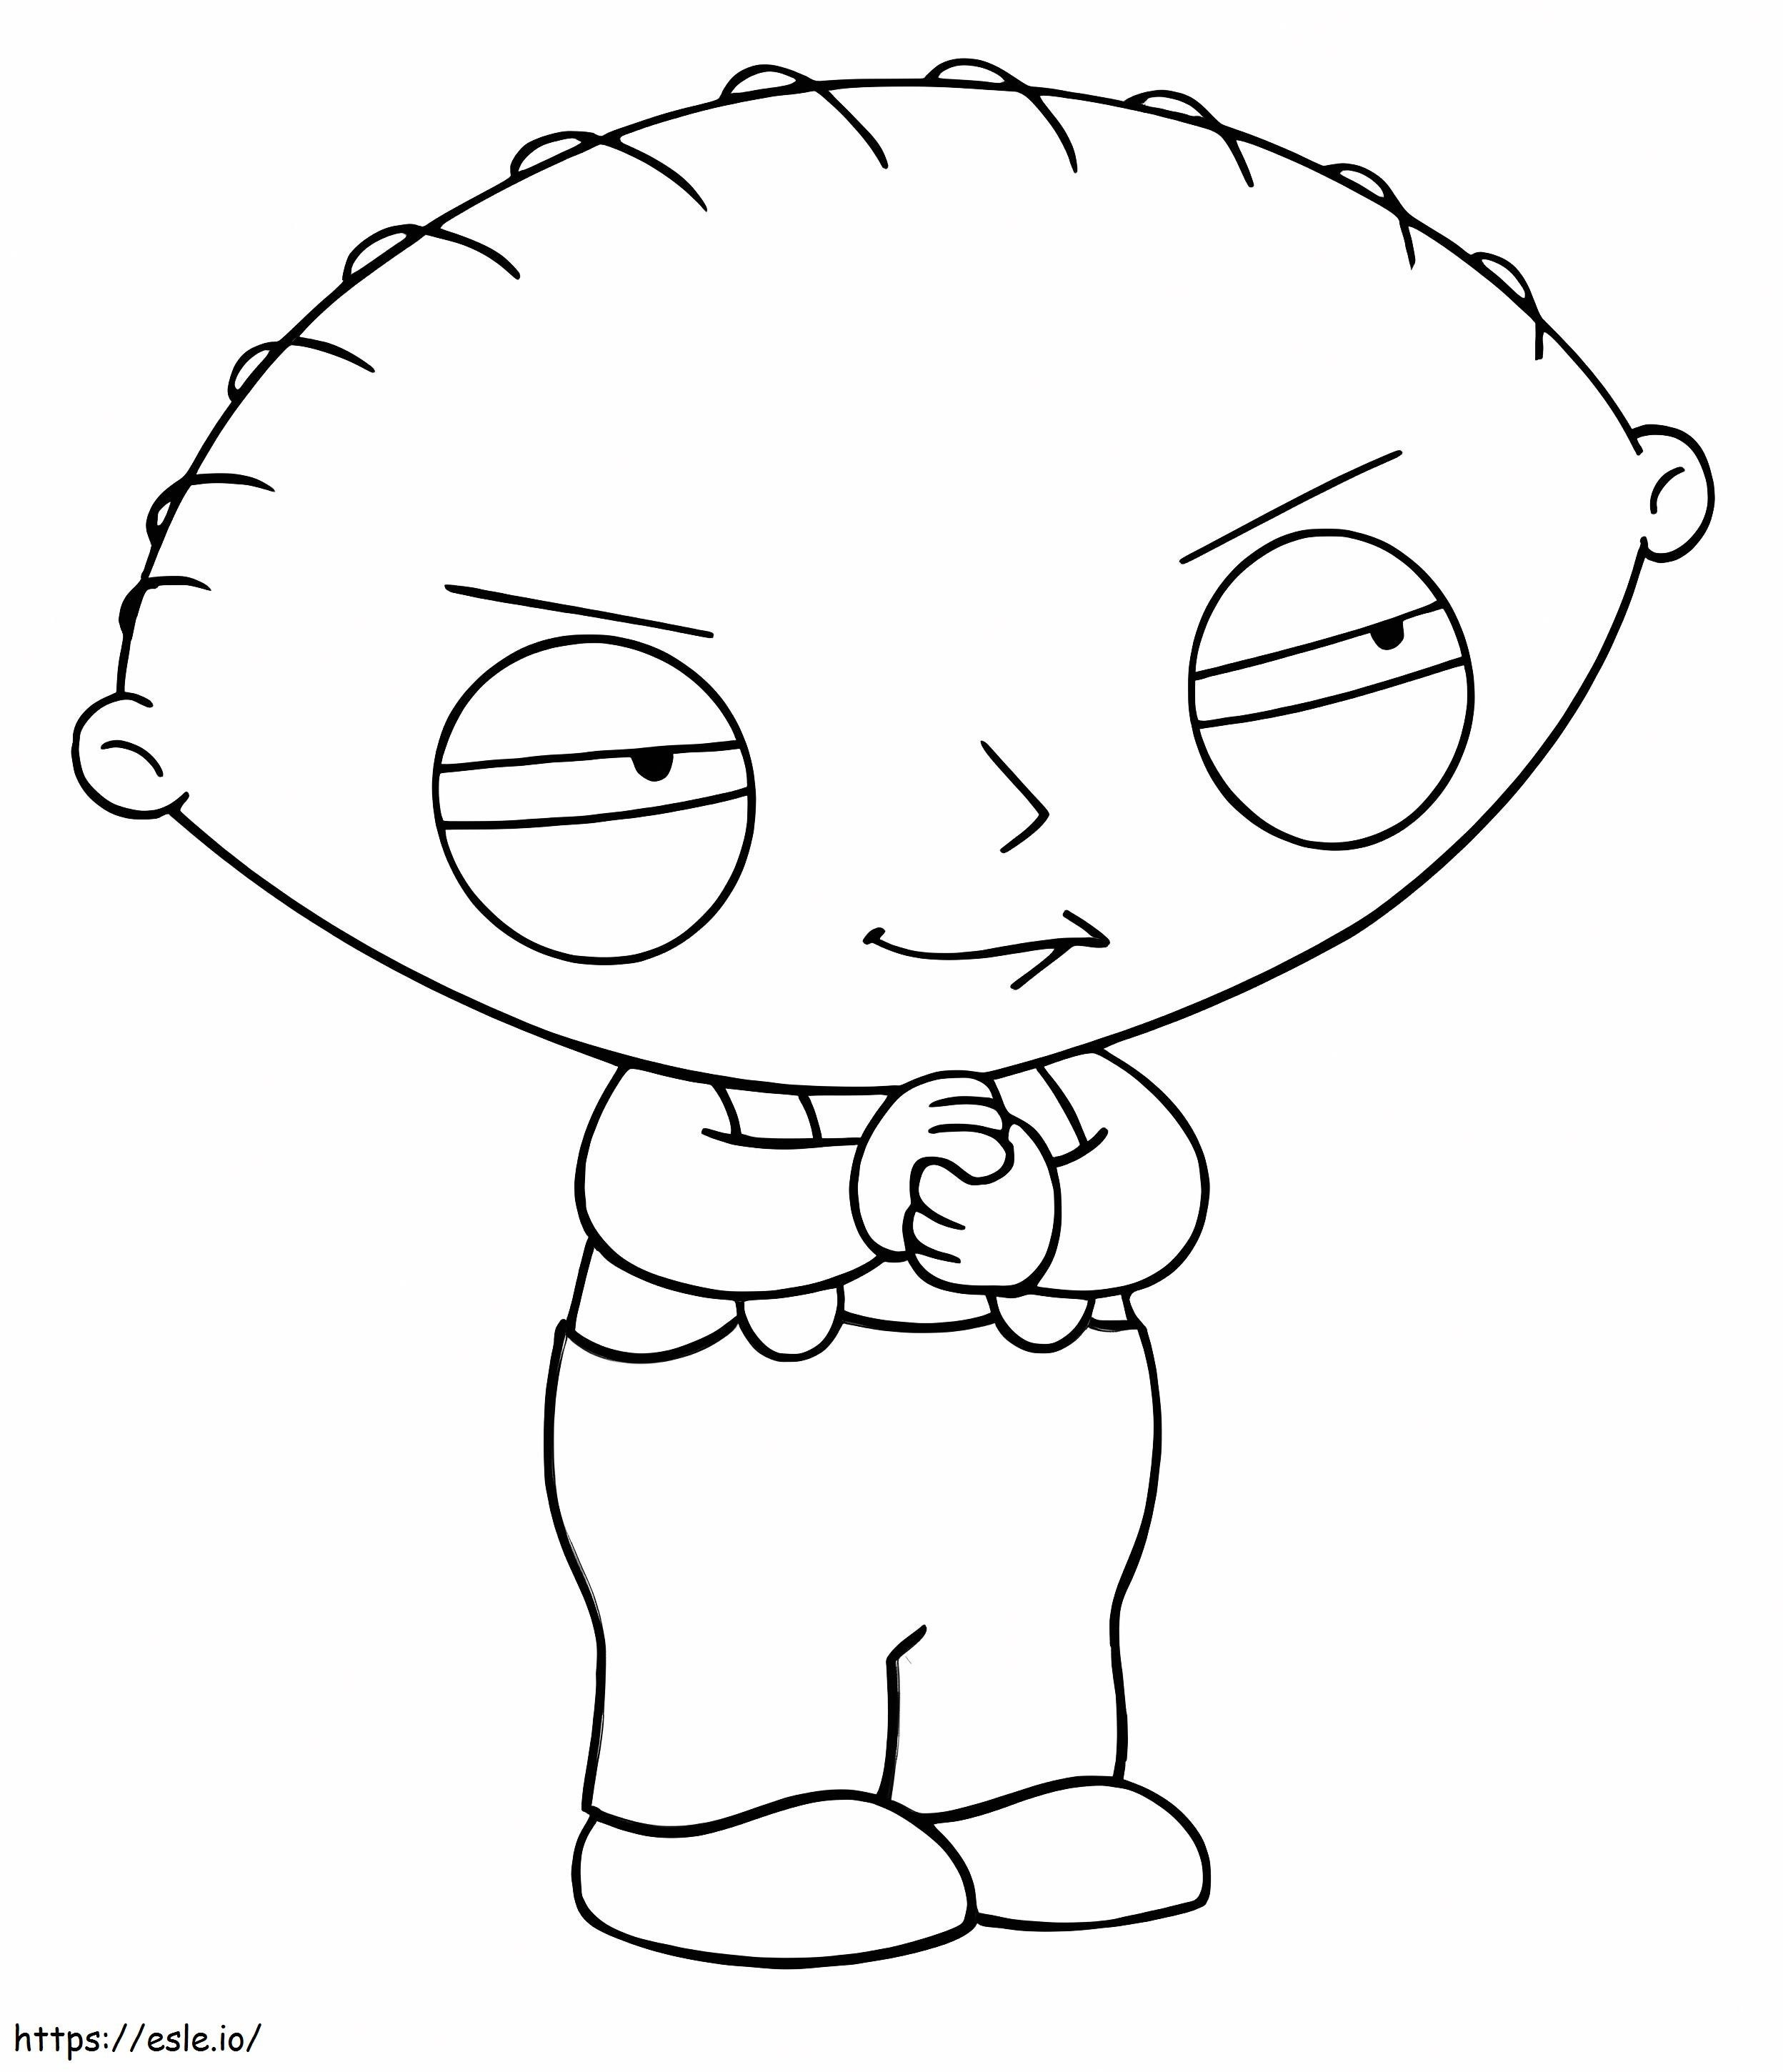 Stewie Griffin coloring page